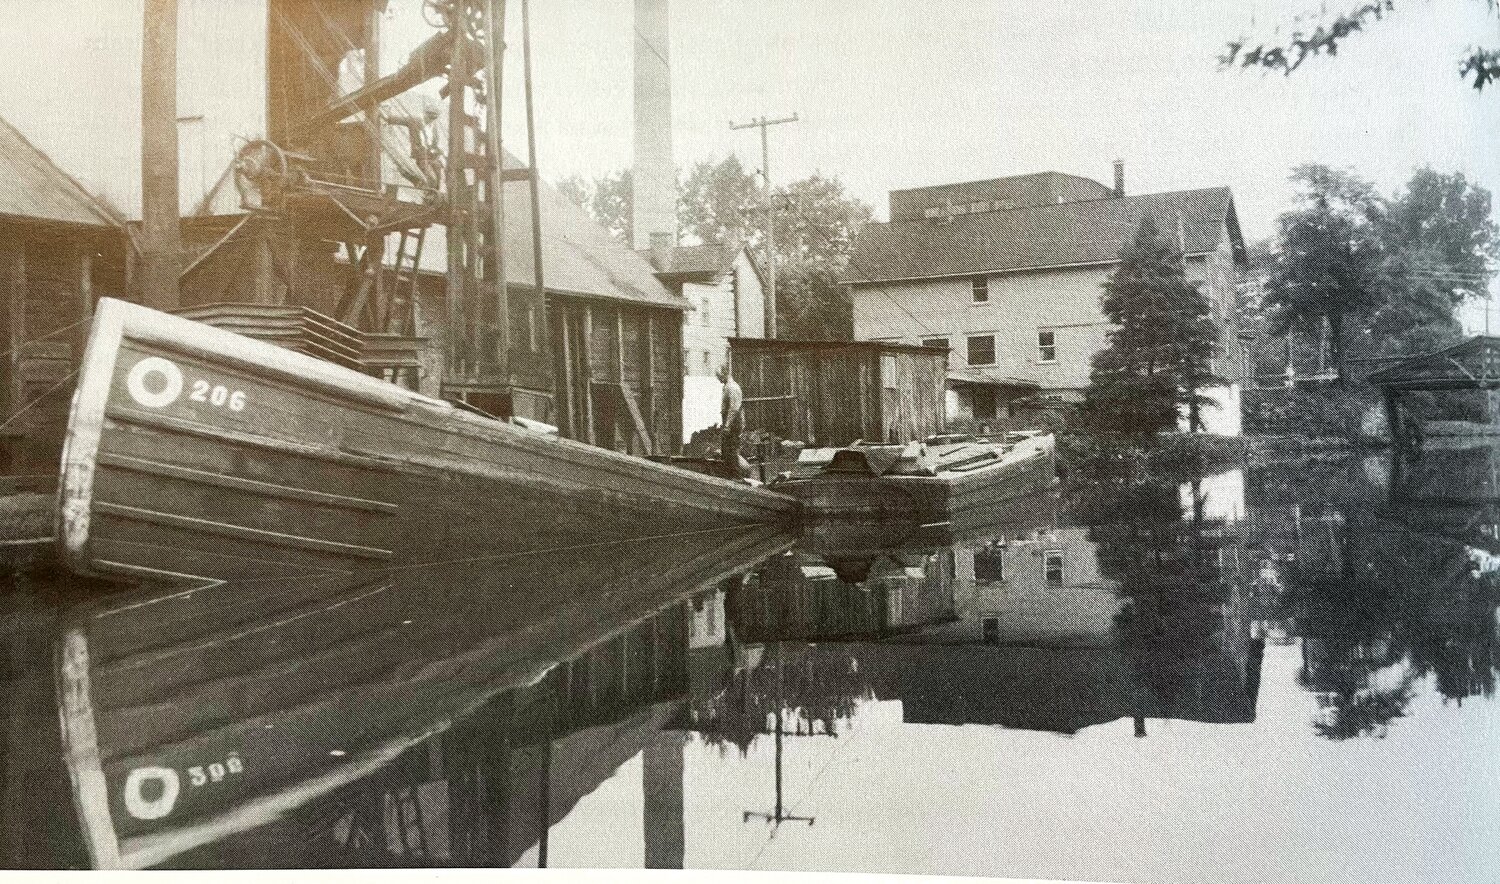 A hinge boat, the most common type of boat used on the Delaware Canal, is off-loaded at the Leedom Coal Yard.